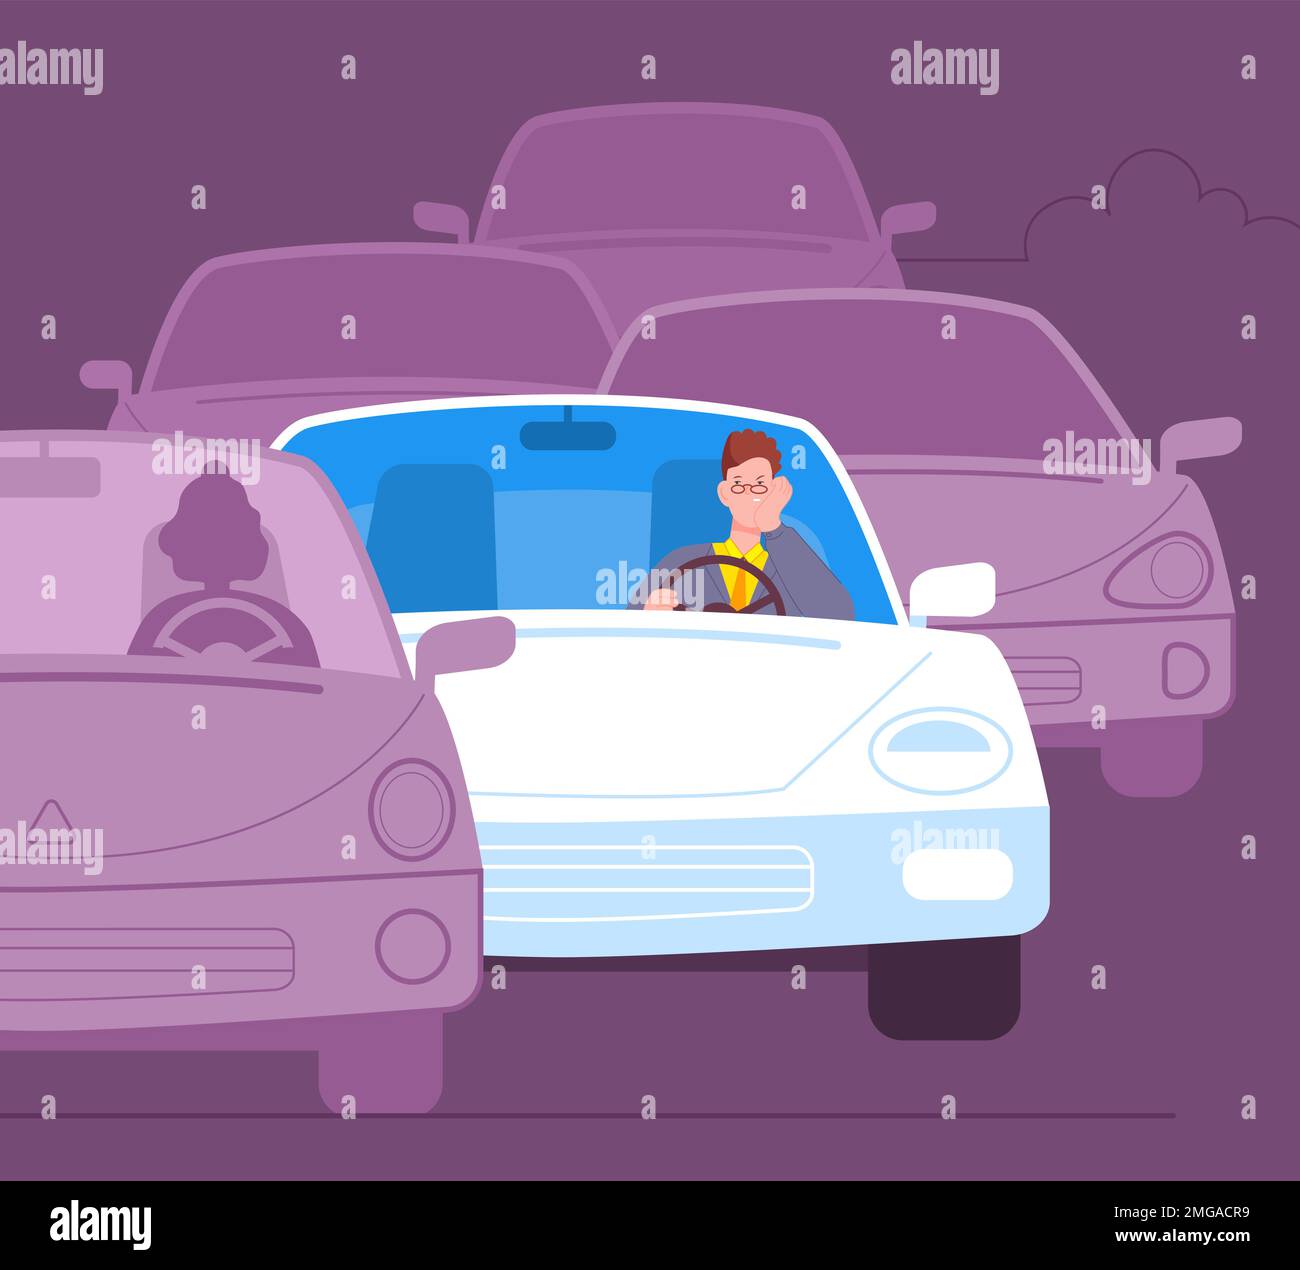 Driver traffic jam. Drivers wait in stuck car of city congestion, slow driving movement problems on highway or street lane crowded road chaos concept, splendid vector illustration of traffic road Stock Vector